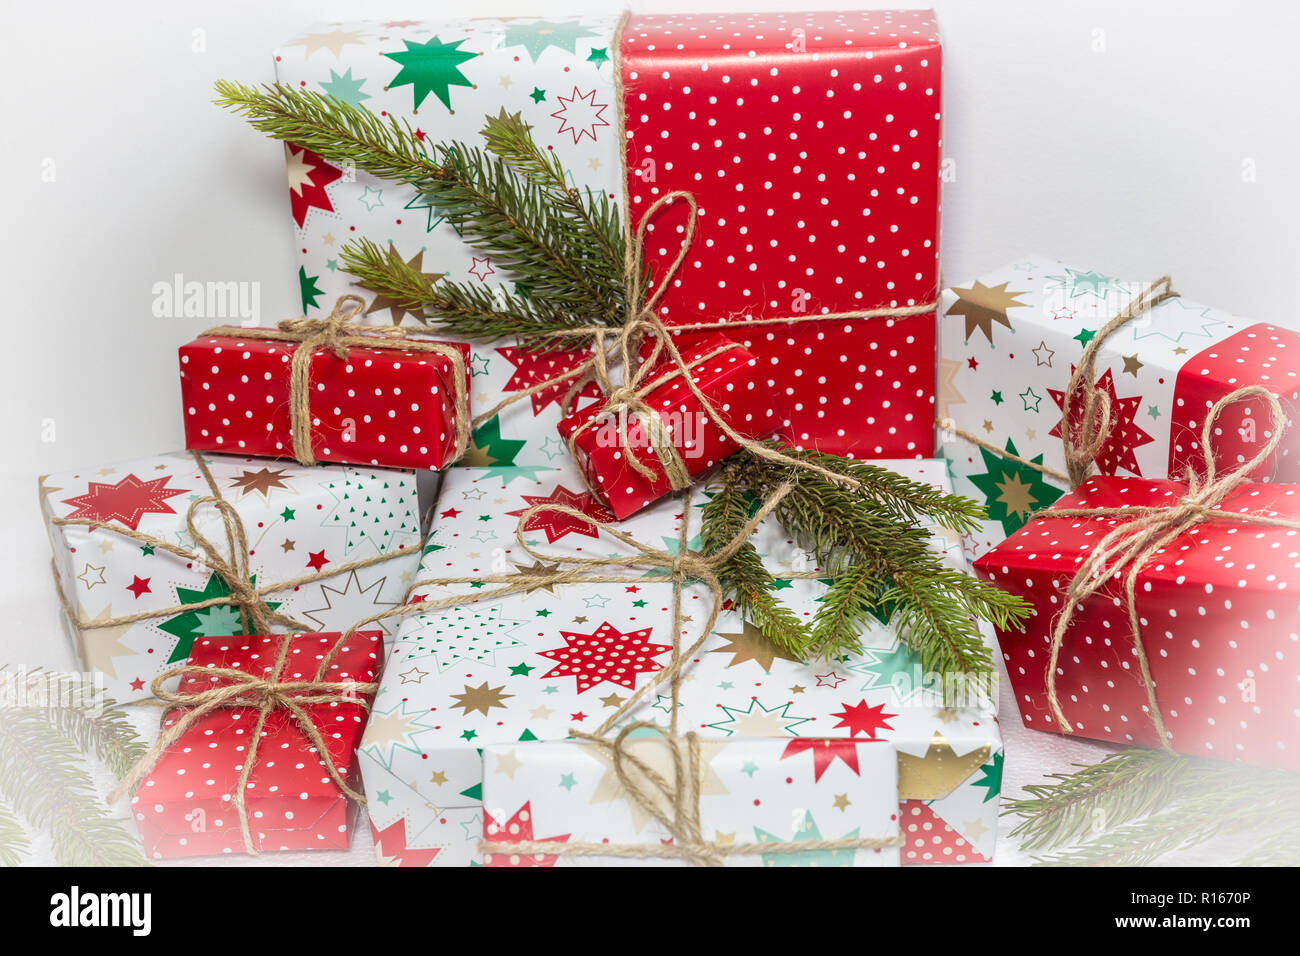 https://c8.alamy.com/comp/R1670P/gift-boxes-and-fir-tree-isolated-on-white-background-christmas-and-new-year-holidays-background-R1670P.jpg